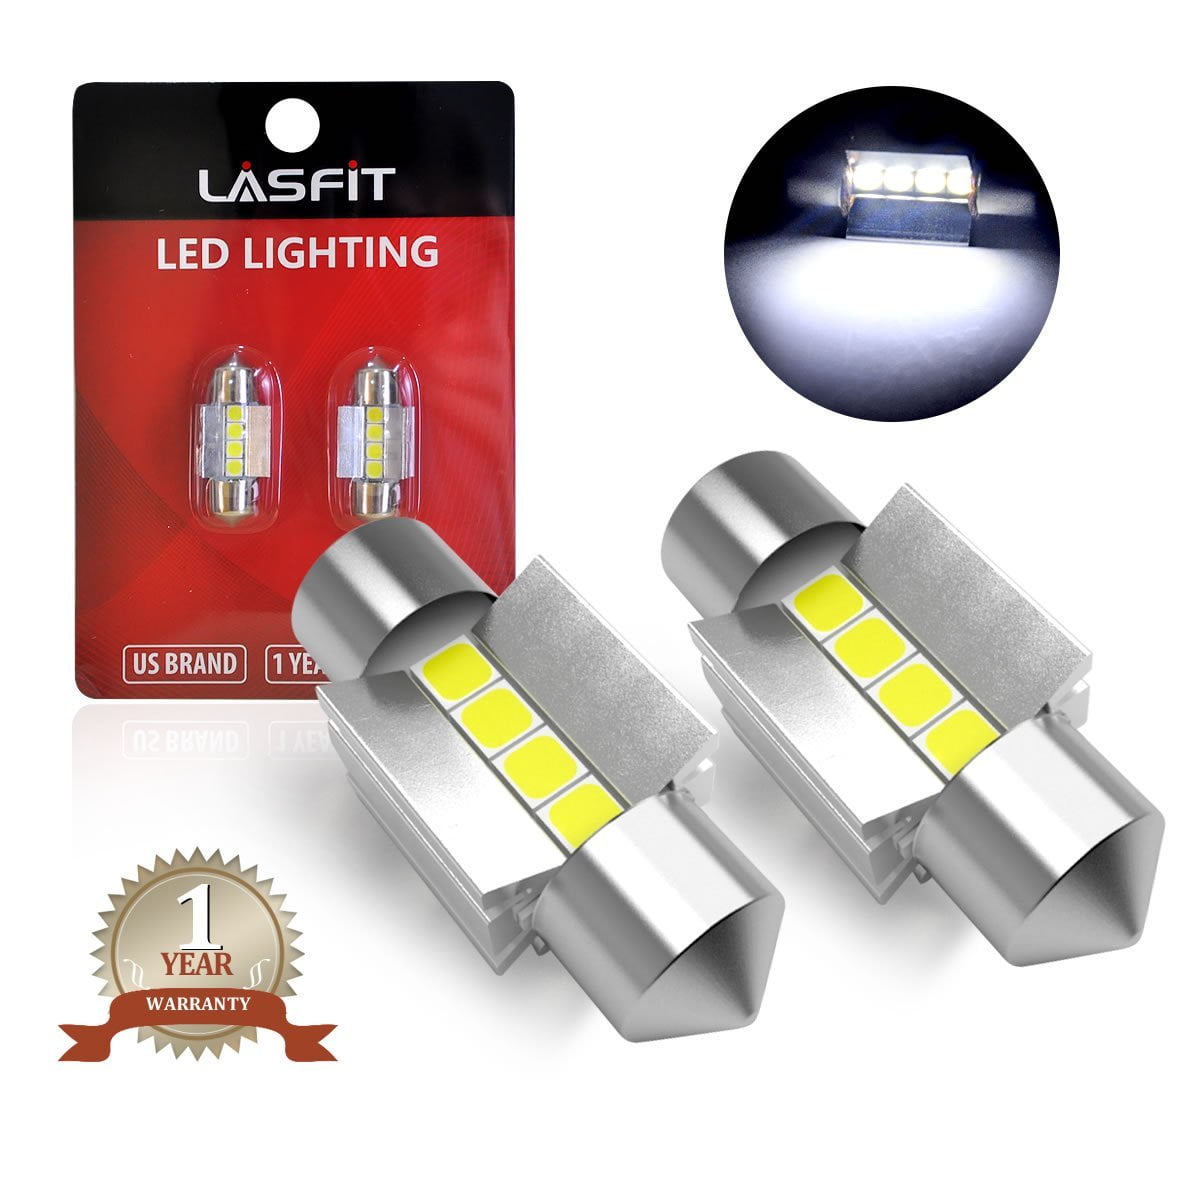 Festoon 31 mm LED and diodes for your license plate lighting on your bike,  motor cycle or moped